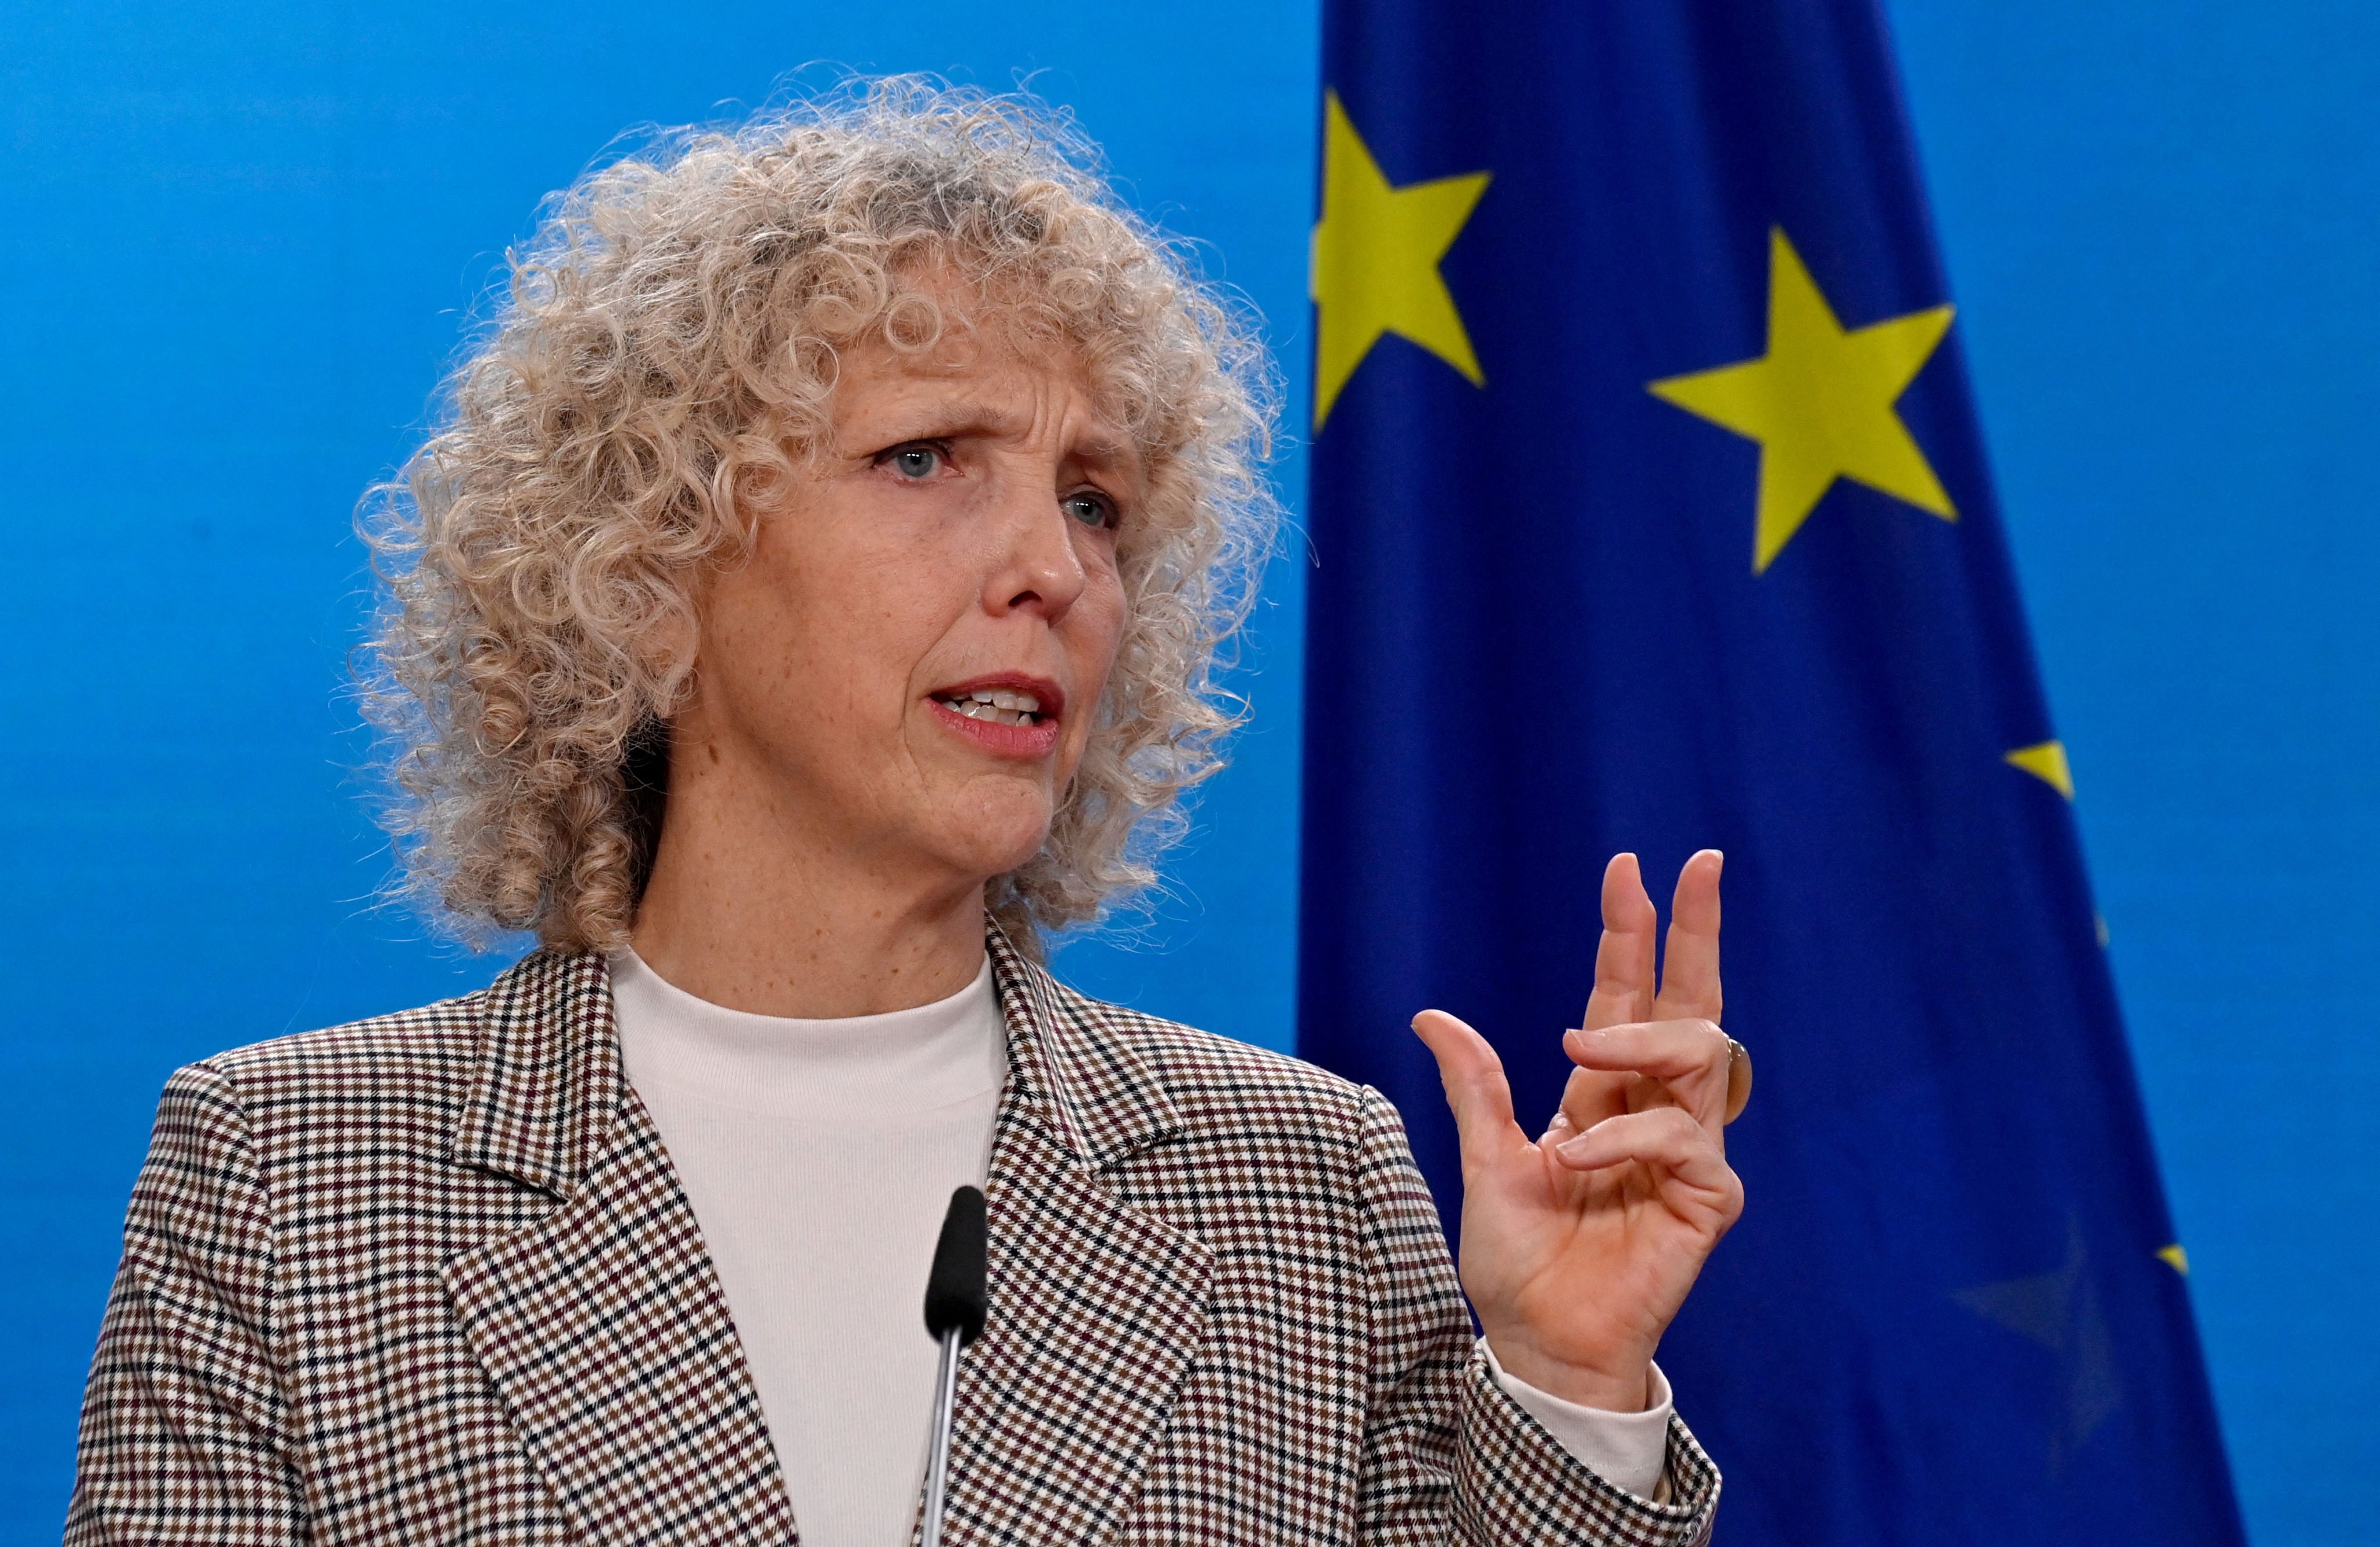 Jennifer Morgan was the head of Greenpeace International before she was named Germany’s special climate envoy in February 2022. Photo: AFP